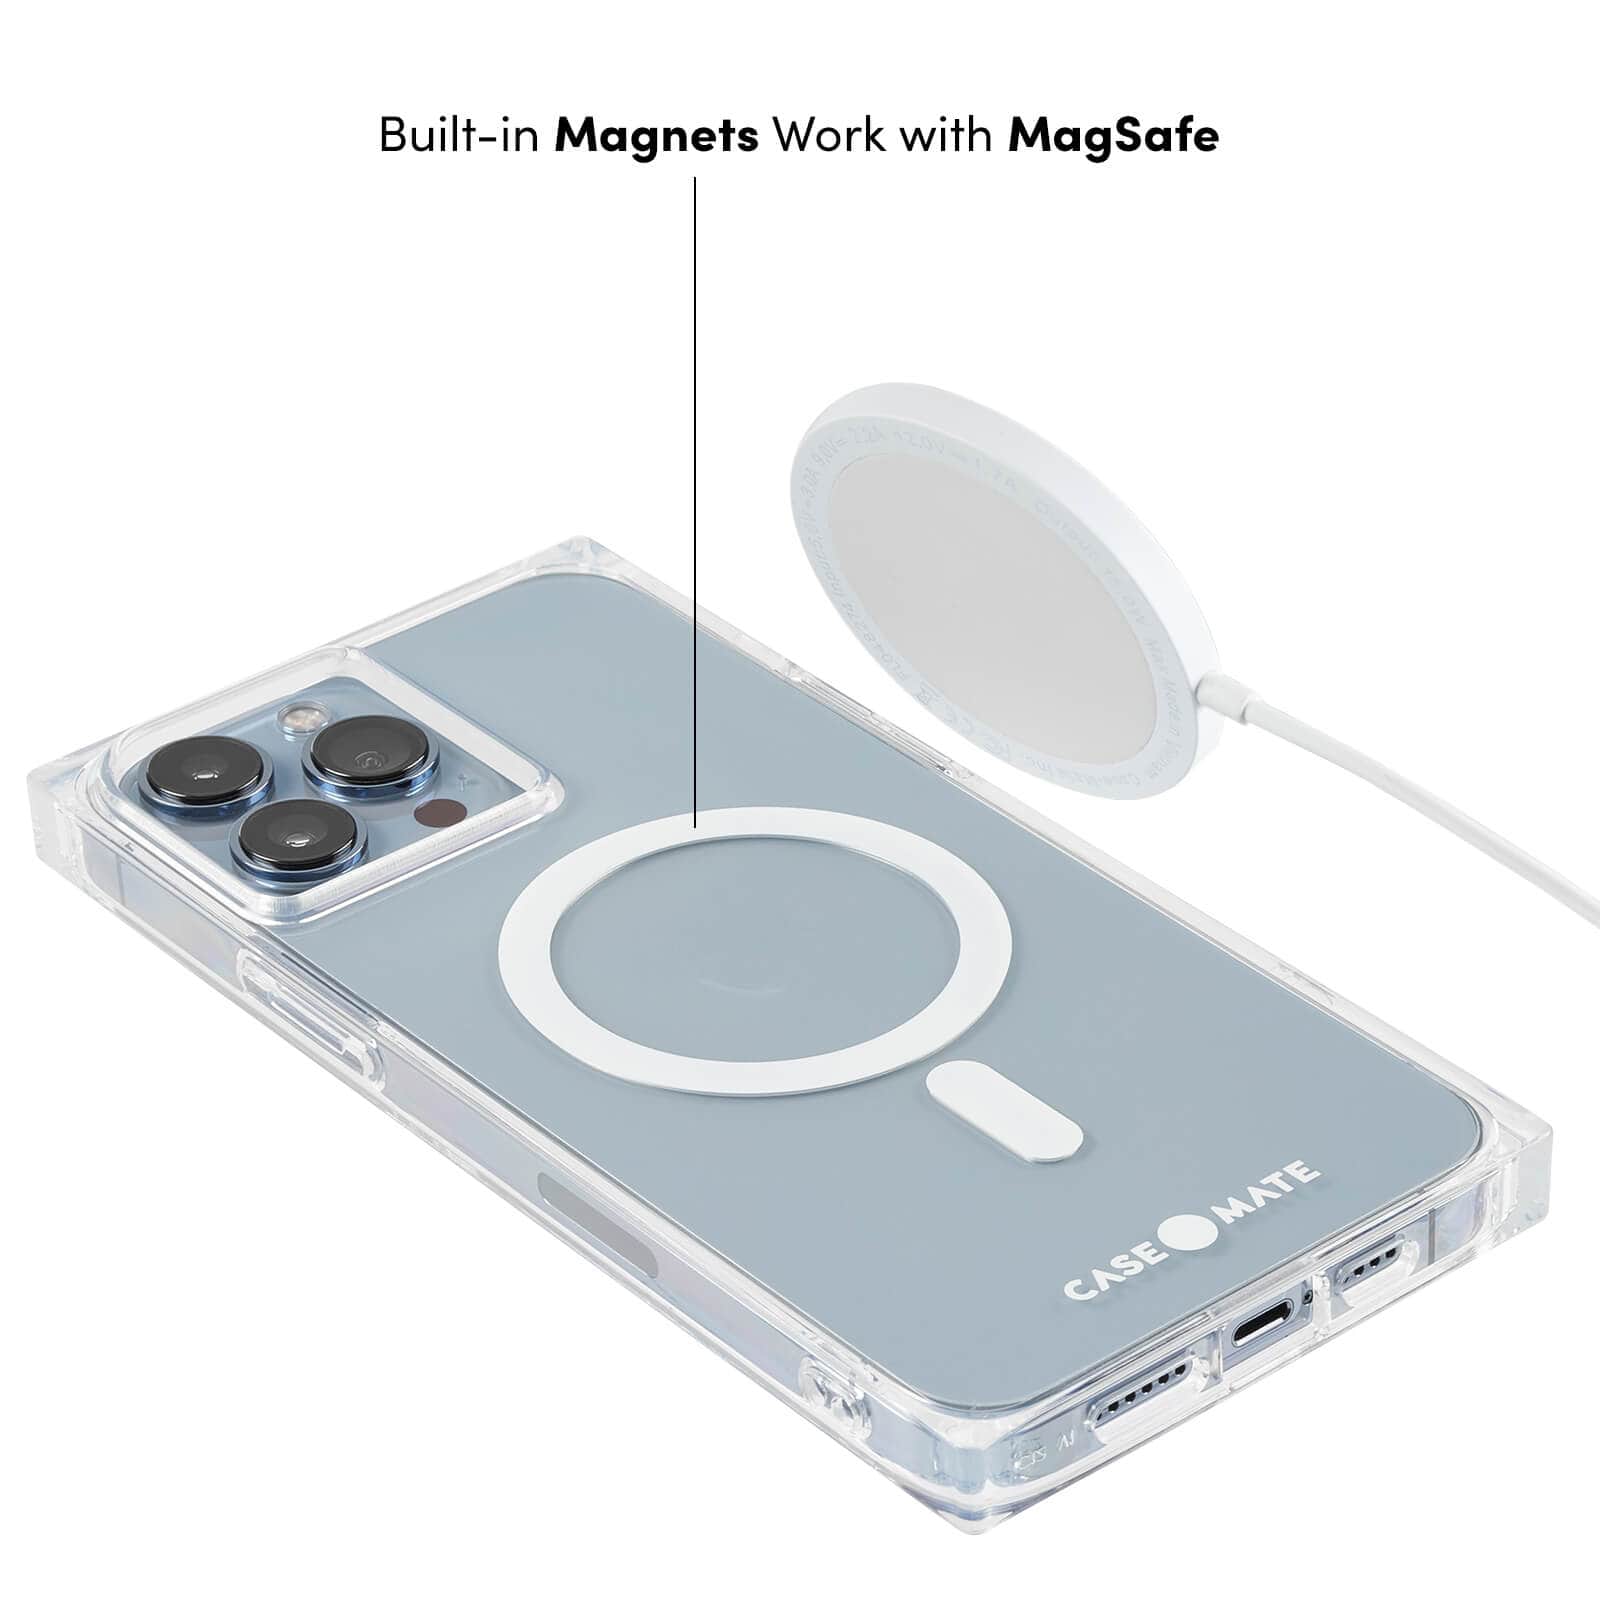 BUILT-IN MAGNETS WORK WITH MAGSAFE. COLOR::CLEAR